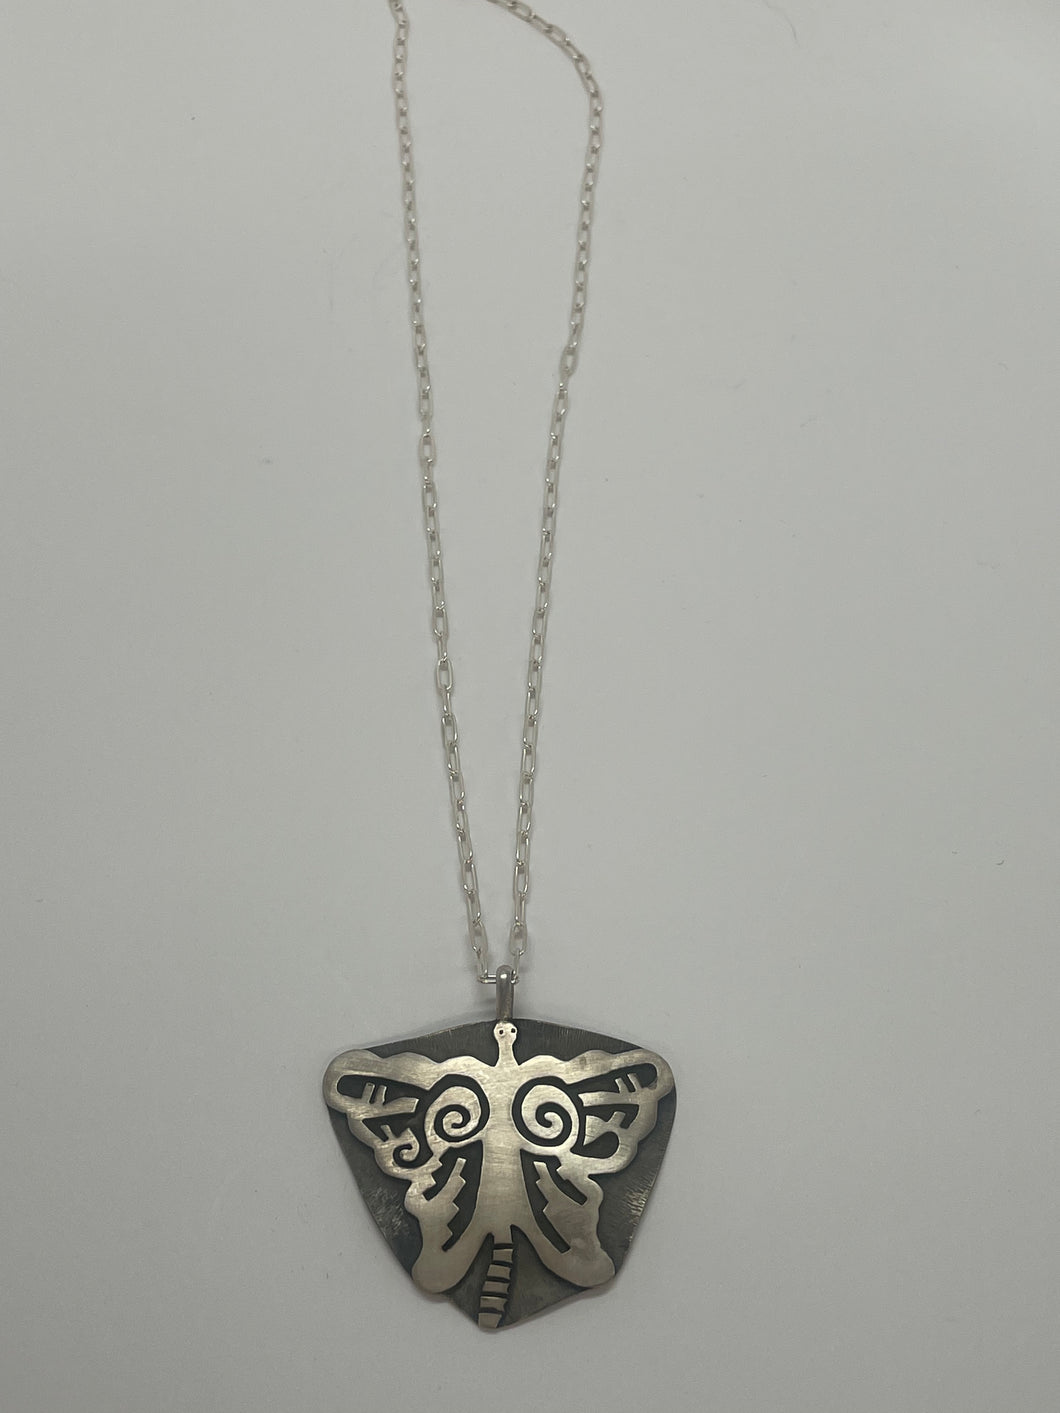 Hopi chain with Moth pendant